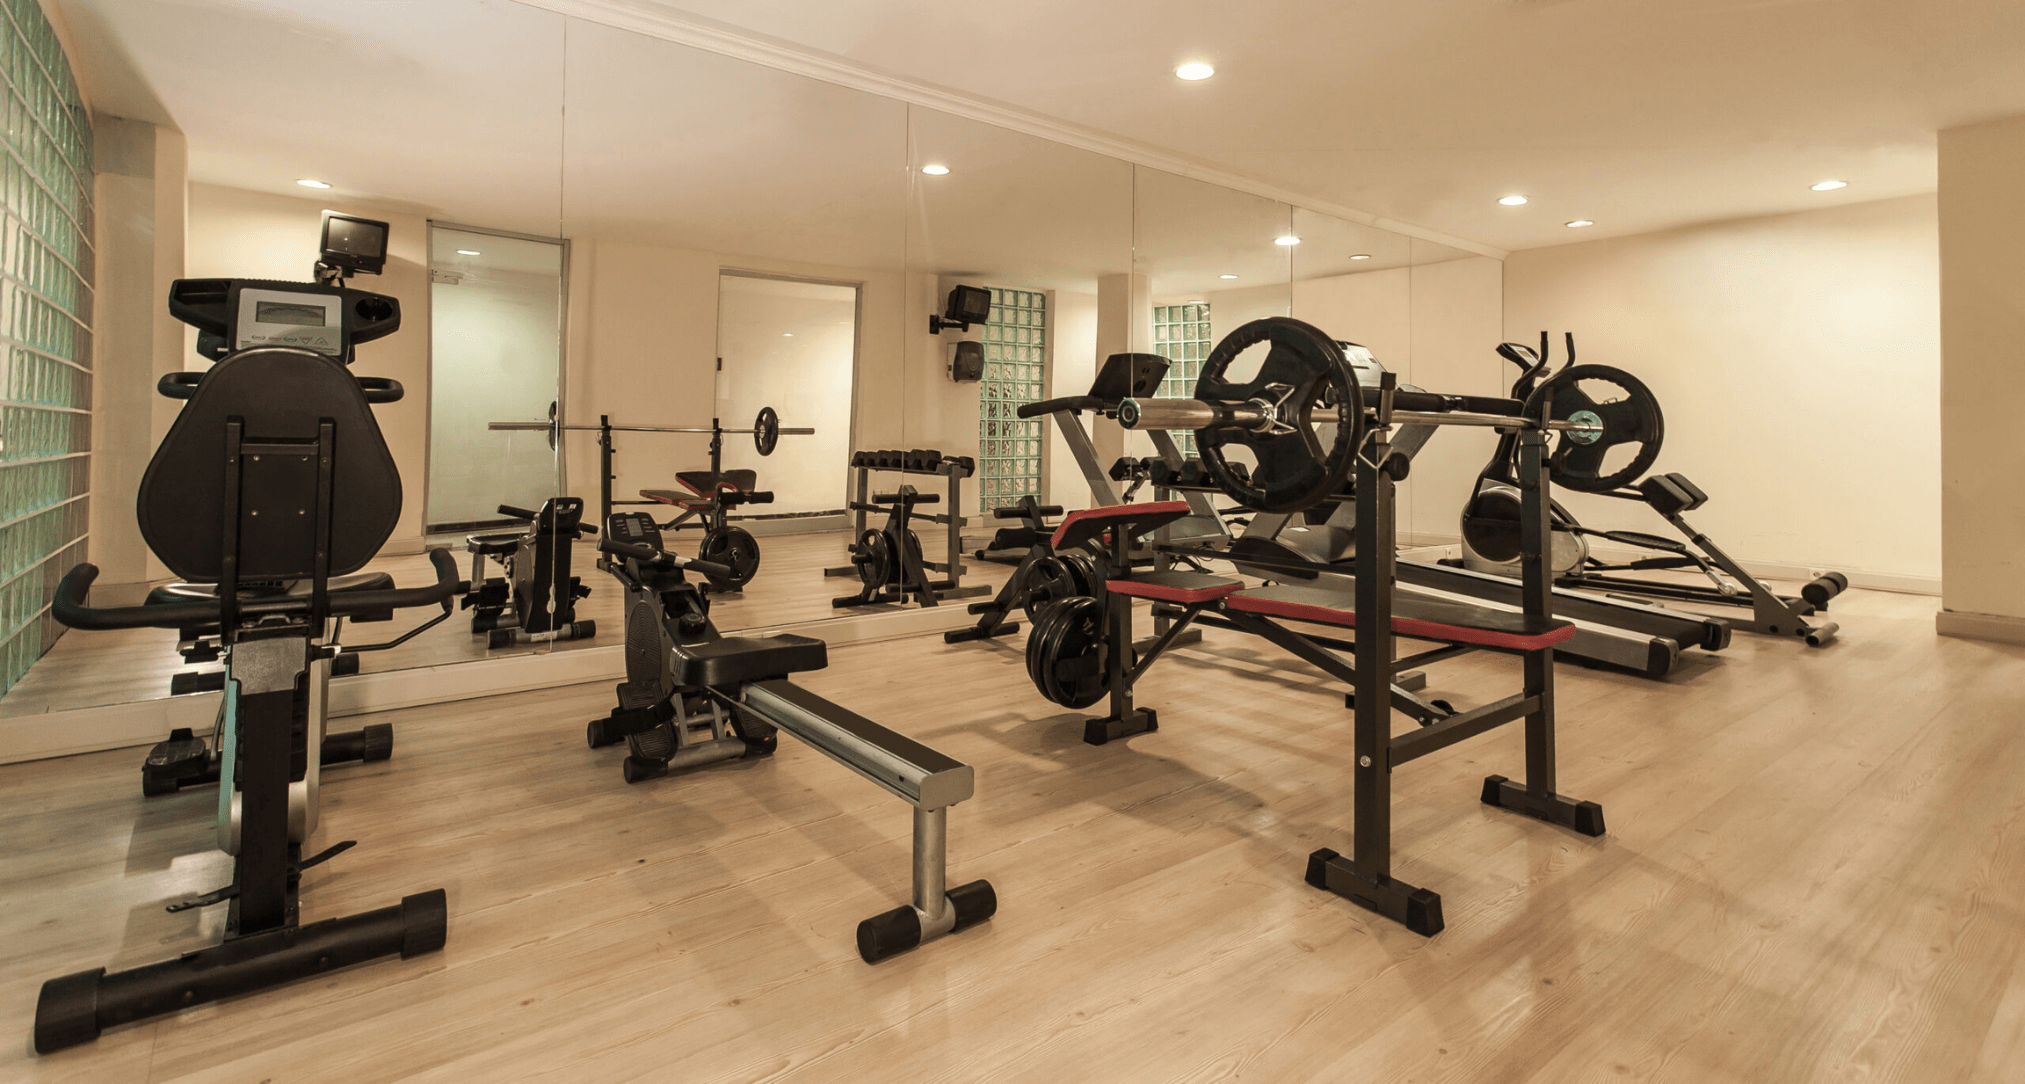 Image of various cardio equipment and a weight bench in a room.